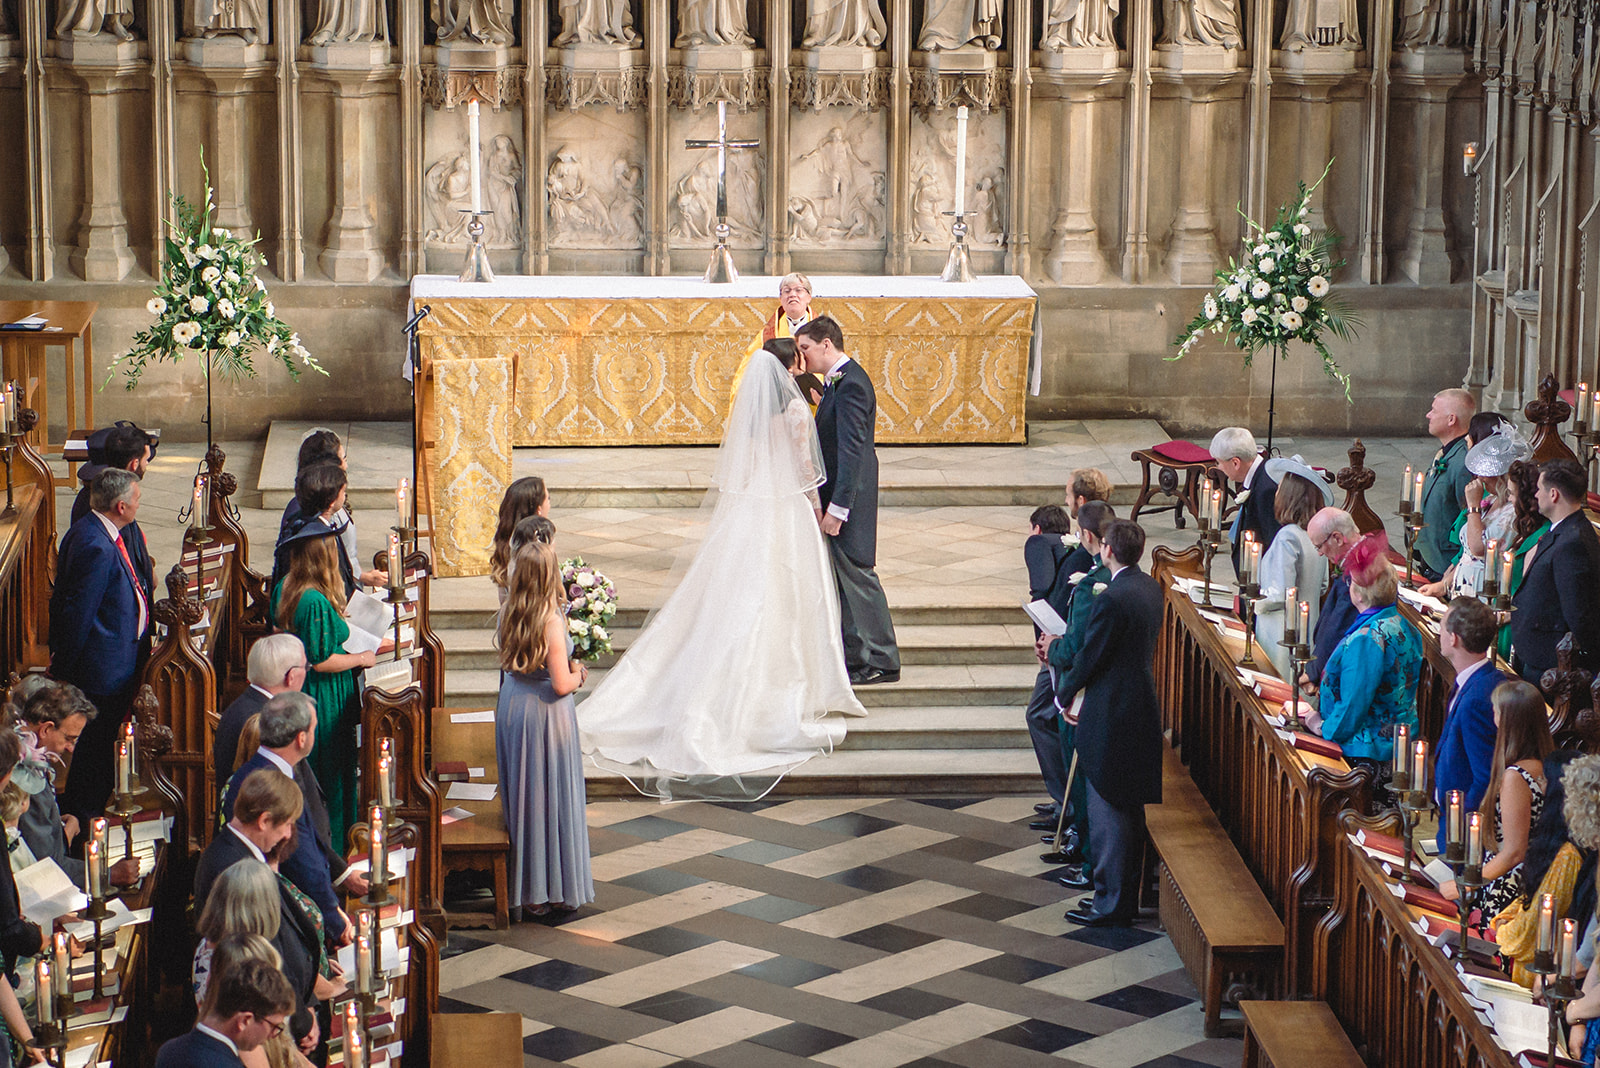 Katherine and Damien kissing during wedding ceremony at the New College Chapel